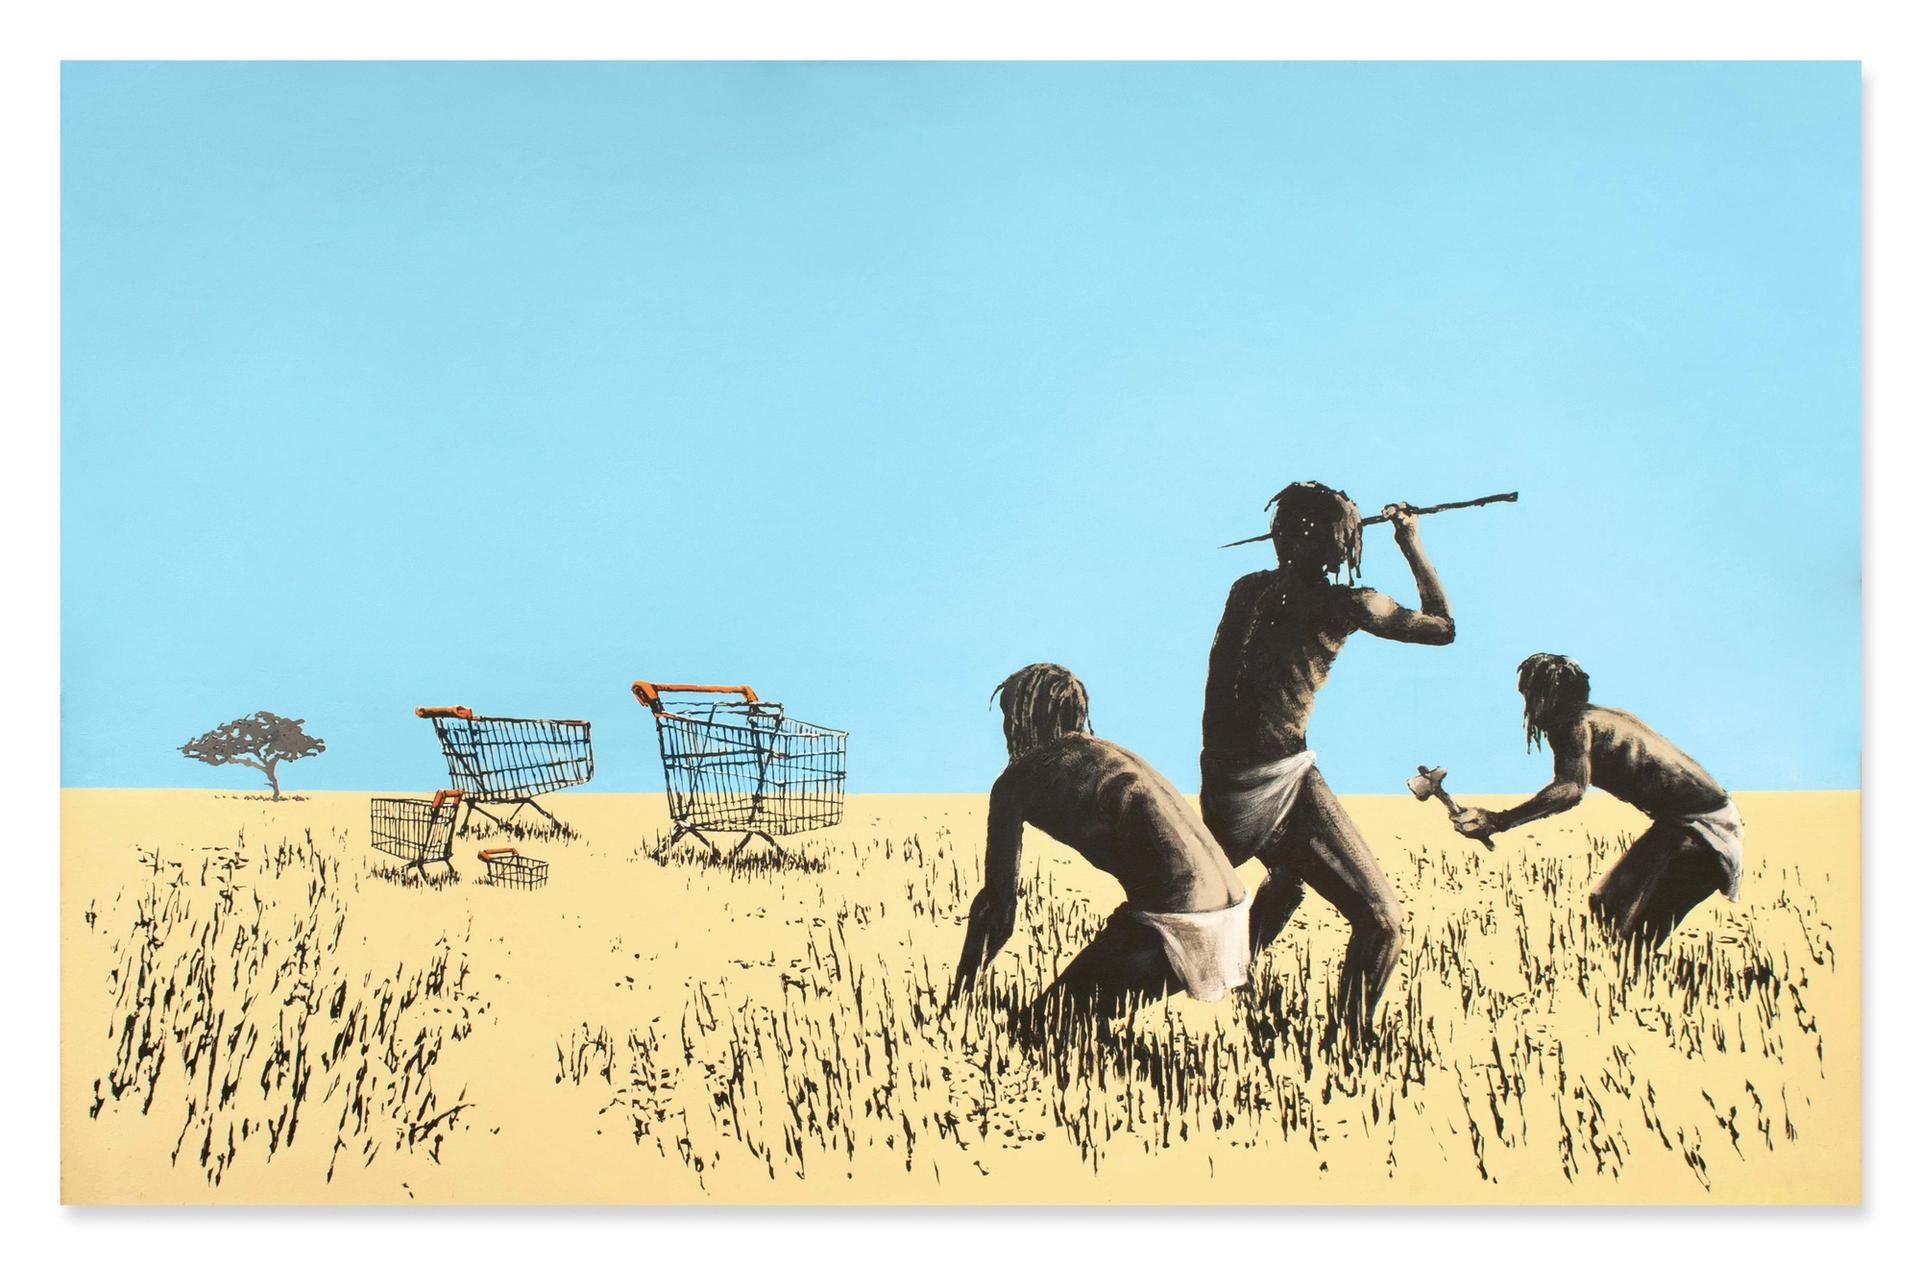 Bansky's Trolley Hunters (2006) will be offered at Sotheby's New York next week, estimate: $5m to $7m. Courtesy of Sotheby's